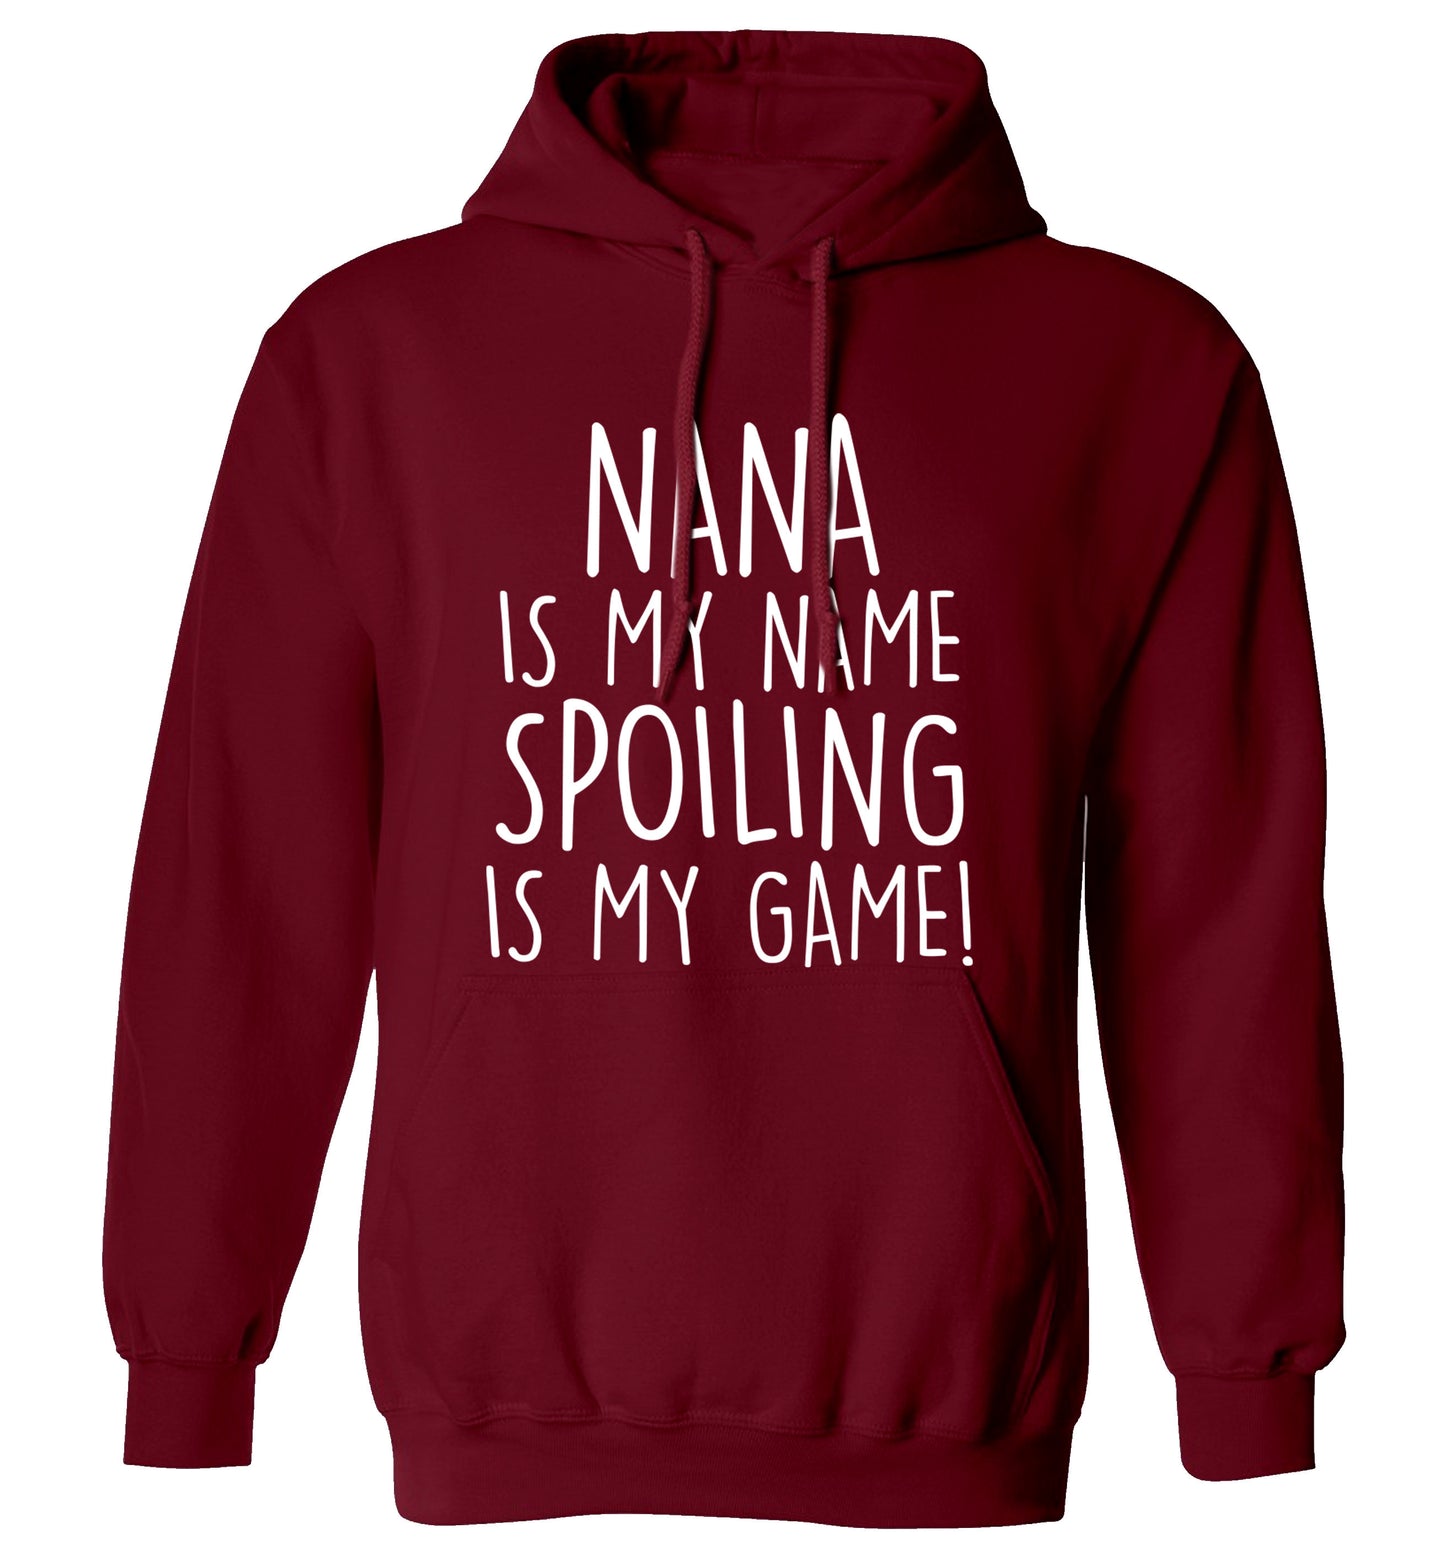 Nana is my name, spoiling is my game adults unisex maroon hoodie 2XL